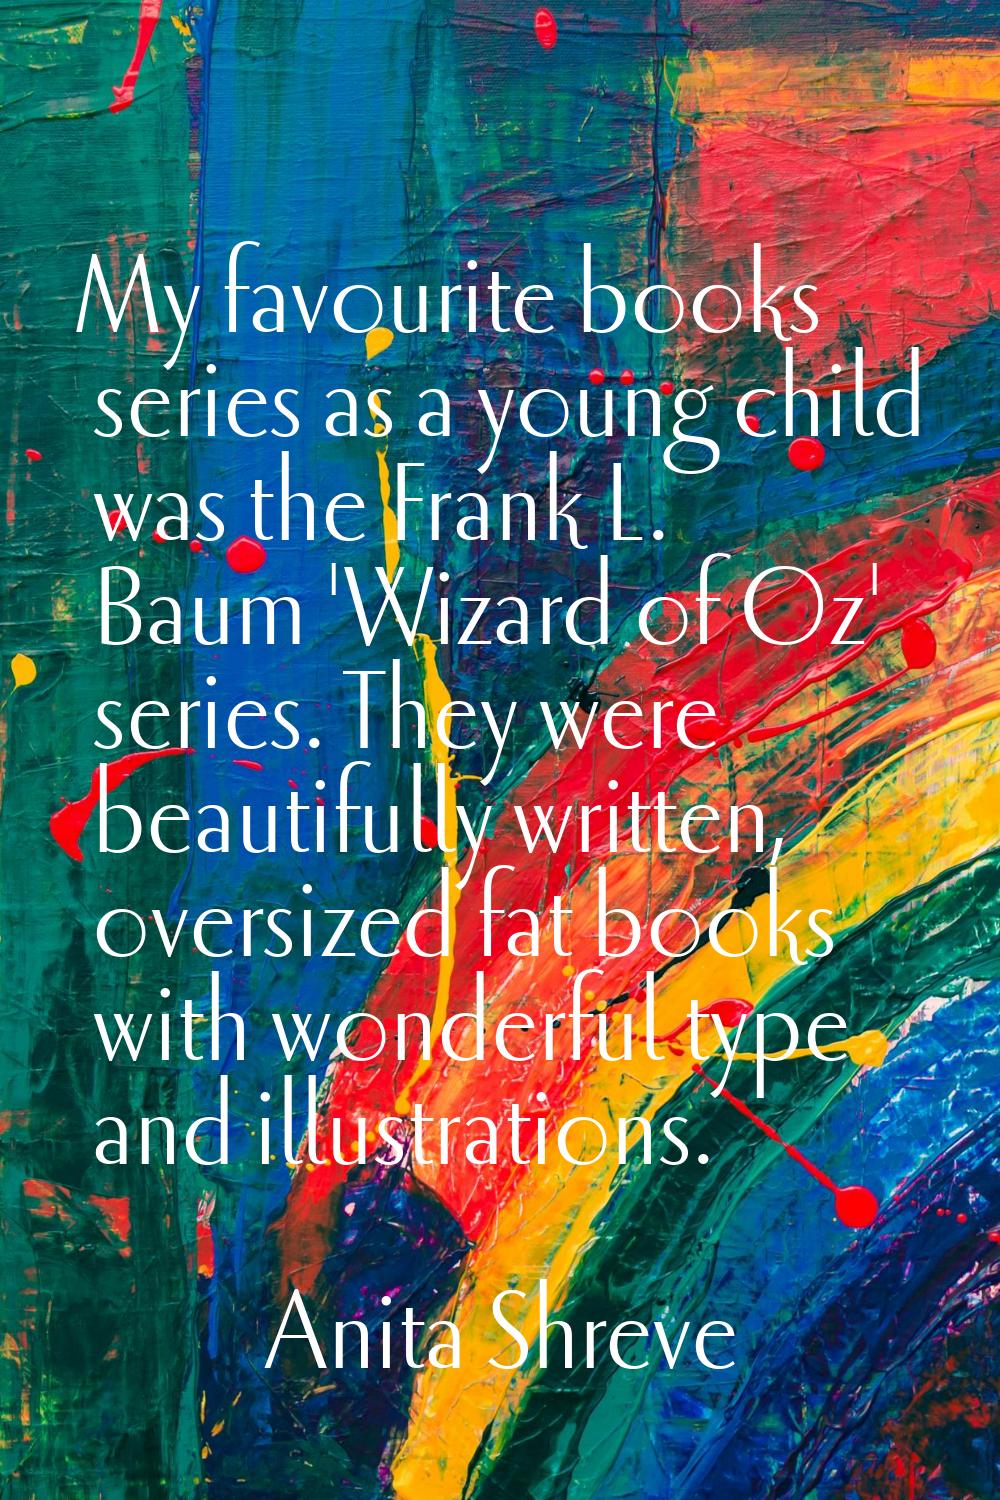 My favourite books series as a young child was the Frank L. Baum 'Wizard of Oz' series. They were b